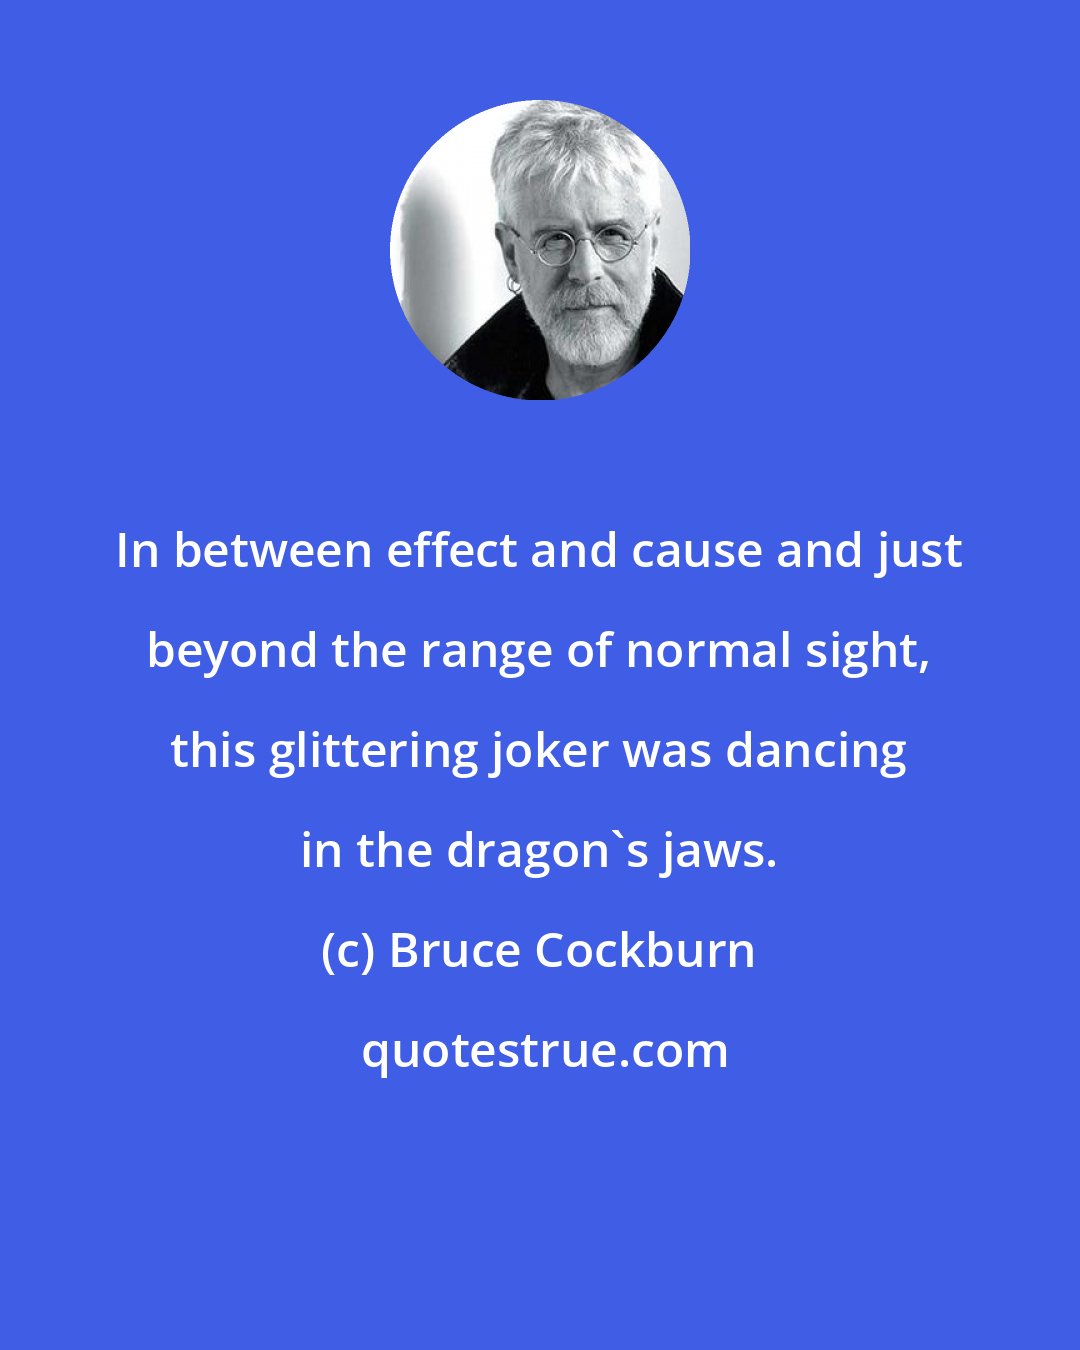 Bruce Cockburn: In between effect and cause and just beyond the range of normal sight, this glittering joker was dancing in the dragon's jaws.